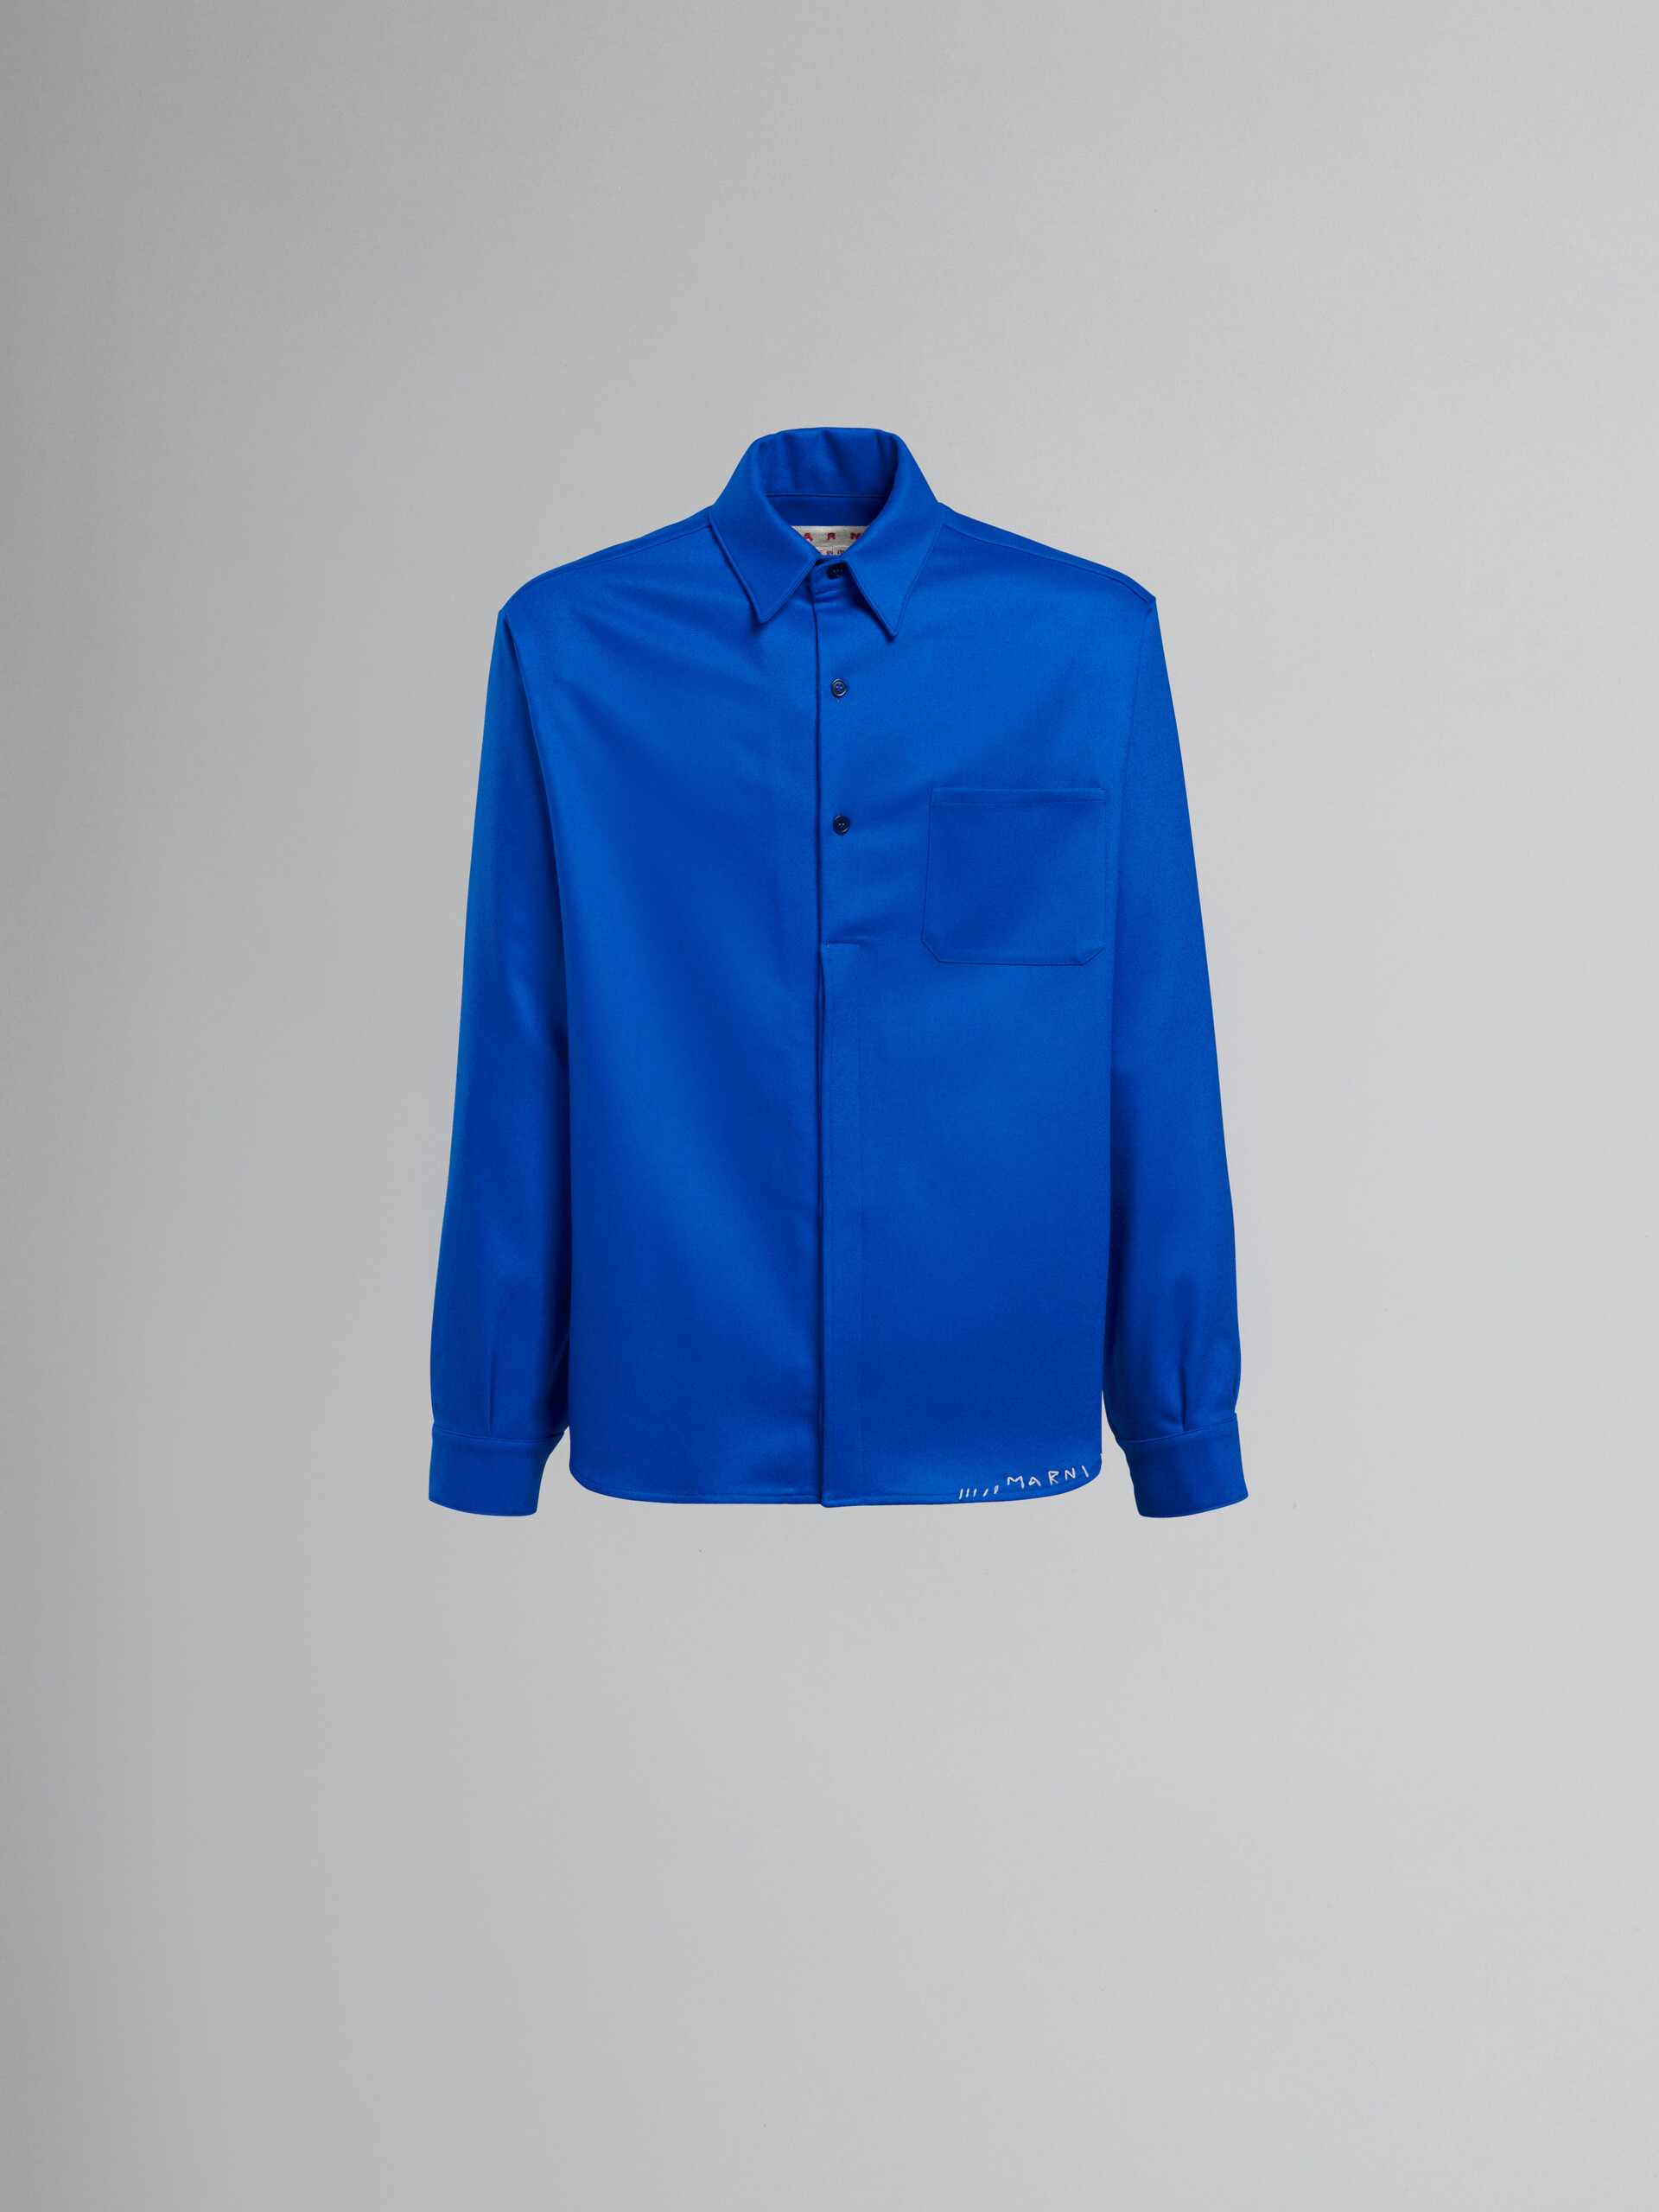 Blue relaxed-fit wool shirt - Shirts - Image 1